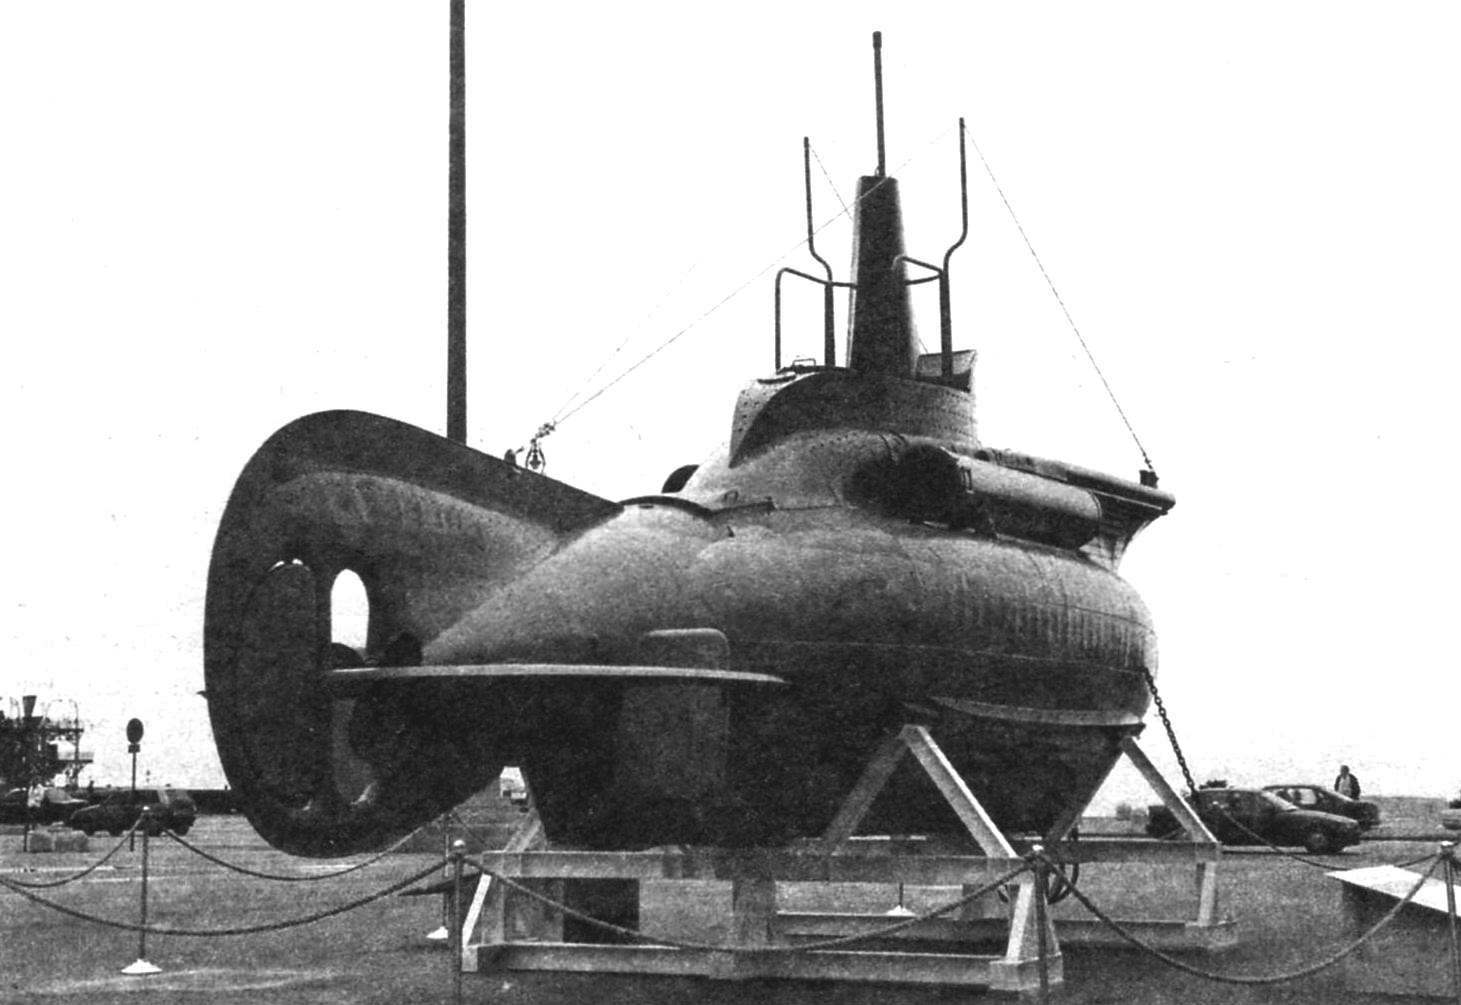 Submarine SV 22 exhibited on the square in Trieste